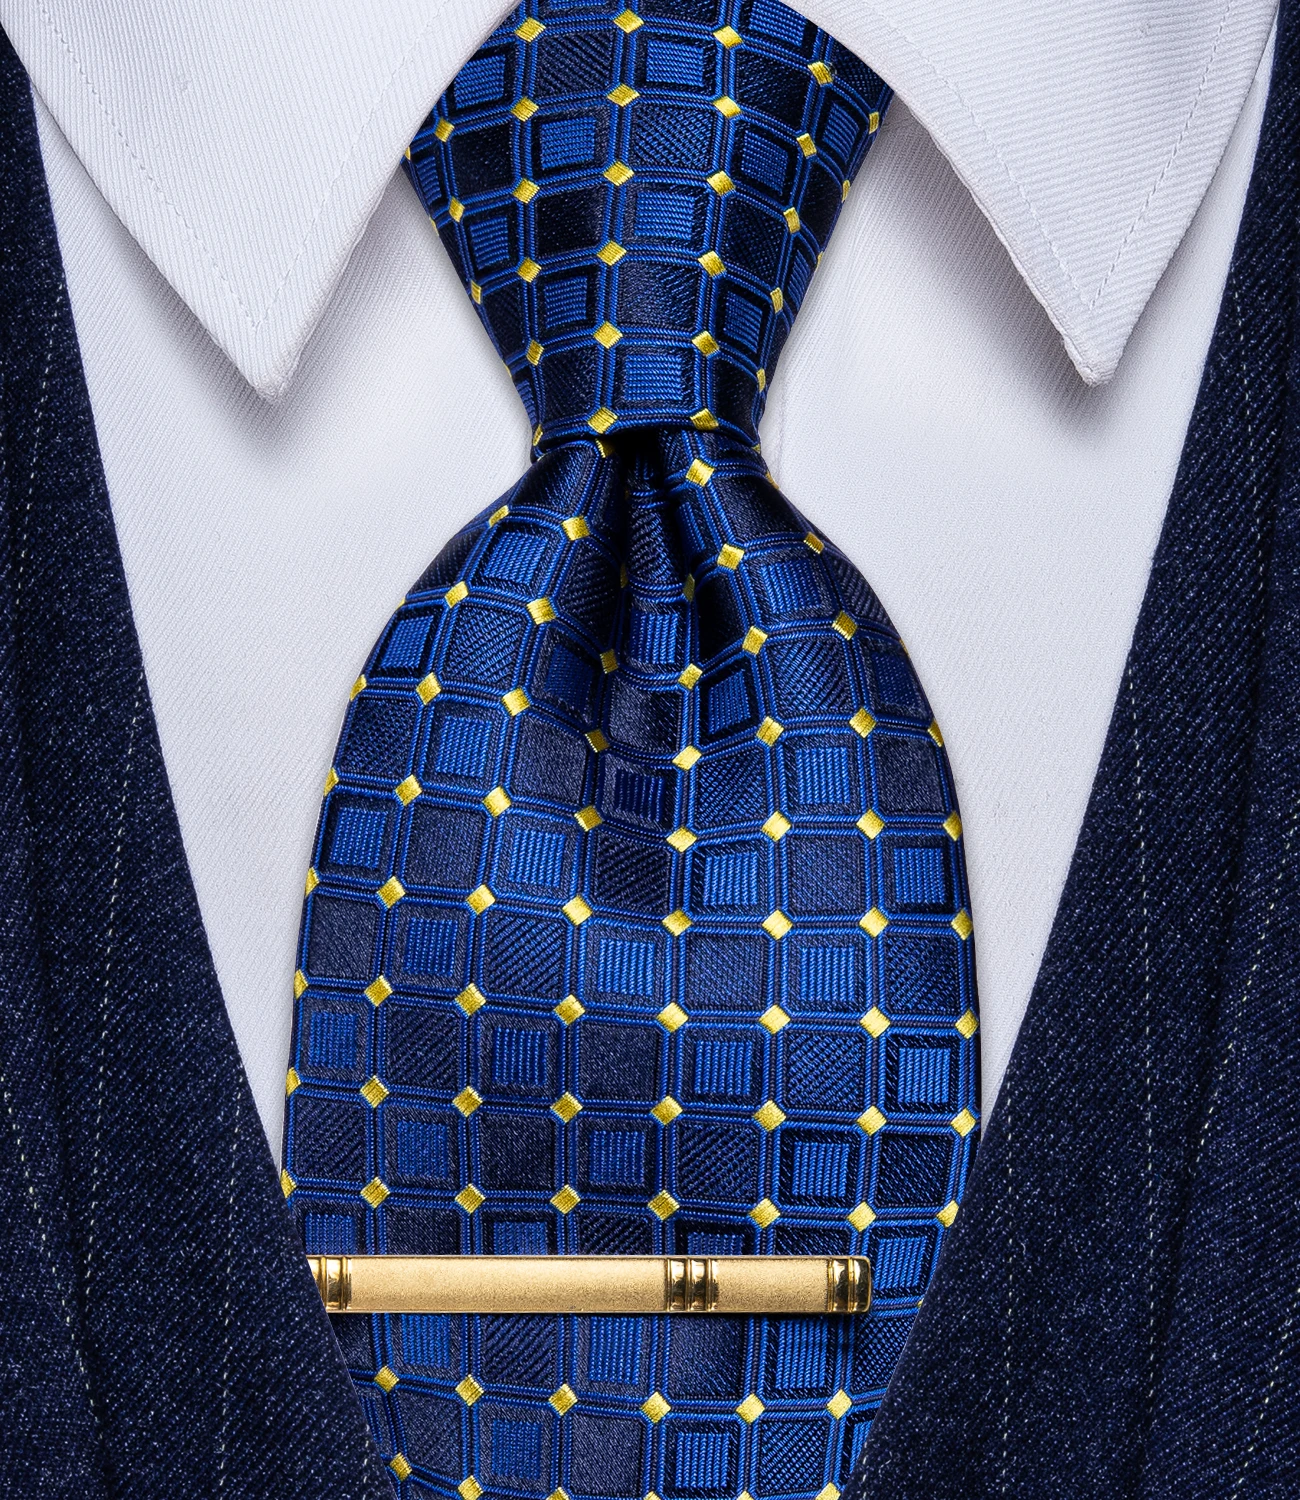 Retro Blue Plaid with Yellow Dots Men's Tie for Man Wedding Party Business Suit Accessories Classic Necktie with Clip Set Gift